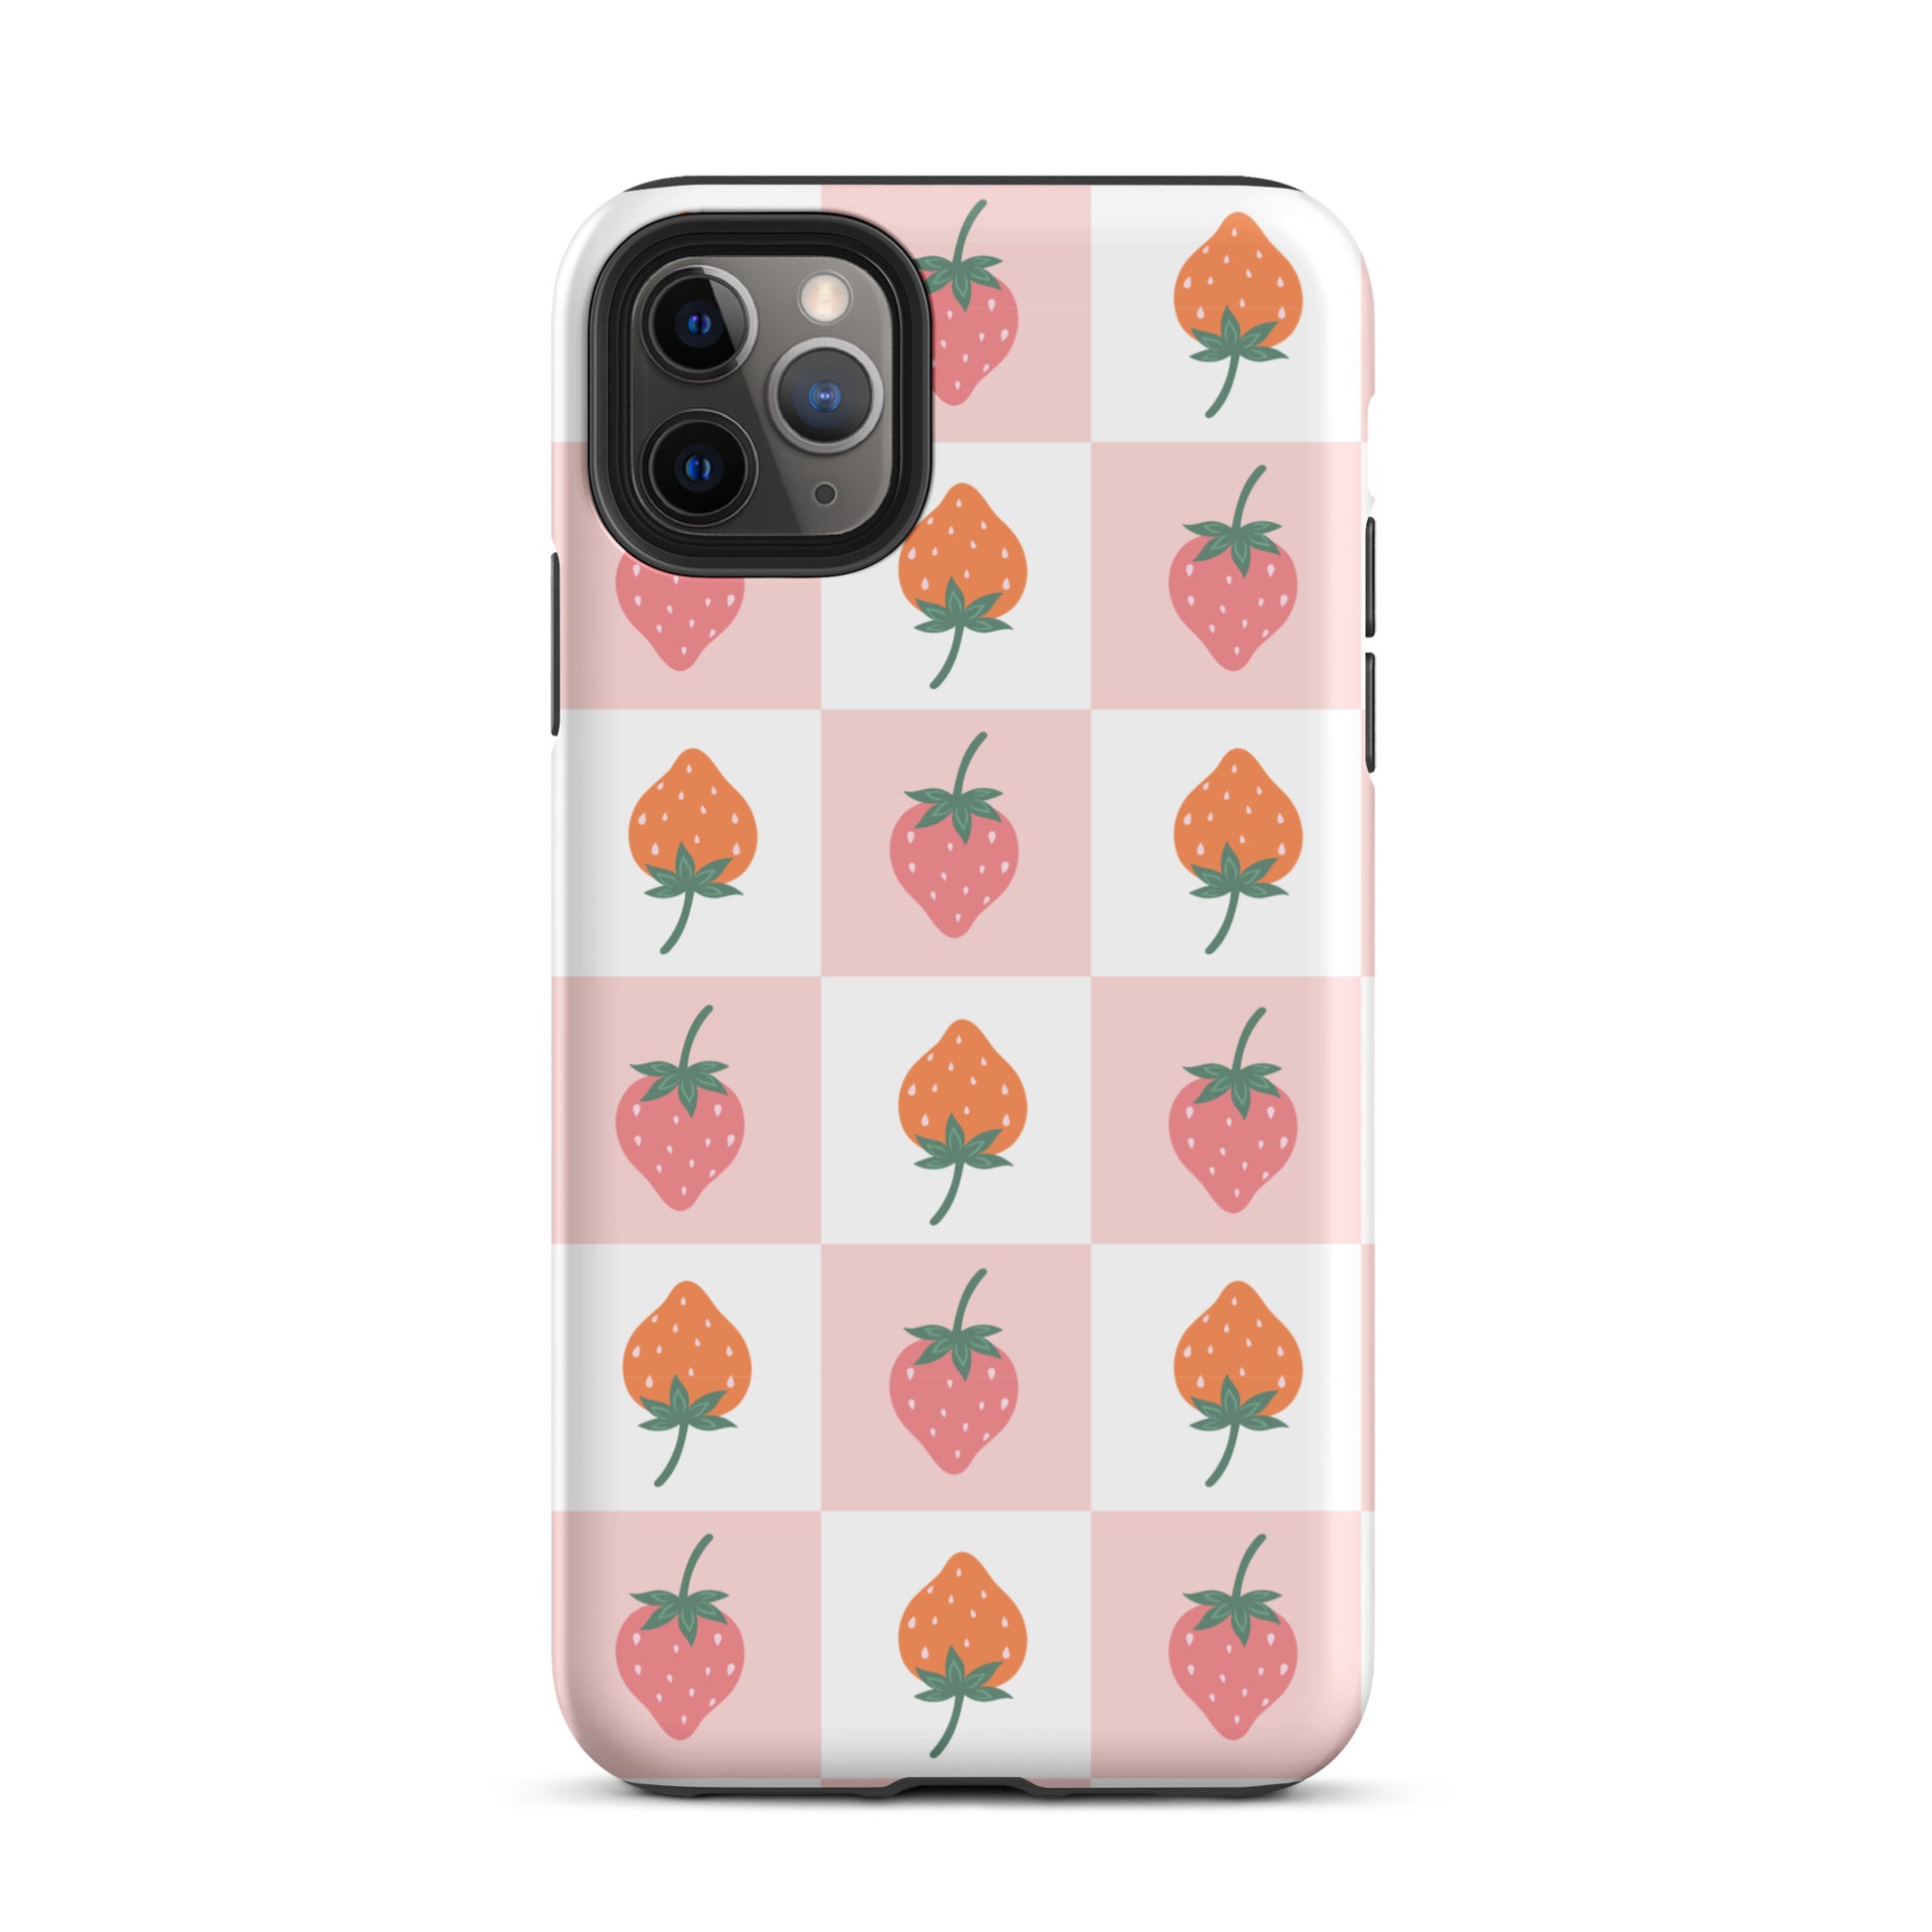 Strawberry Checkered iPhone Case iPhone 11 Pro Max Matte